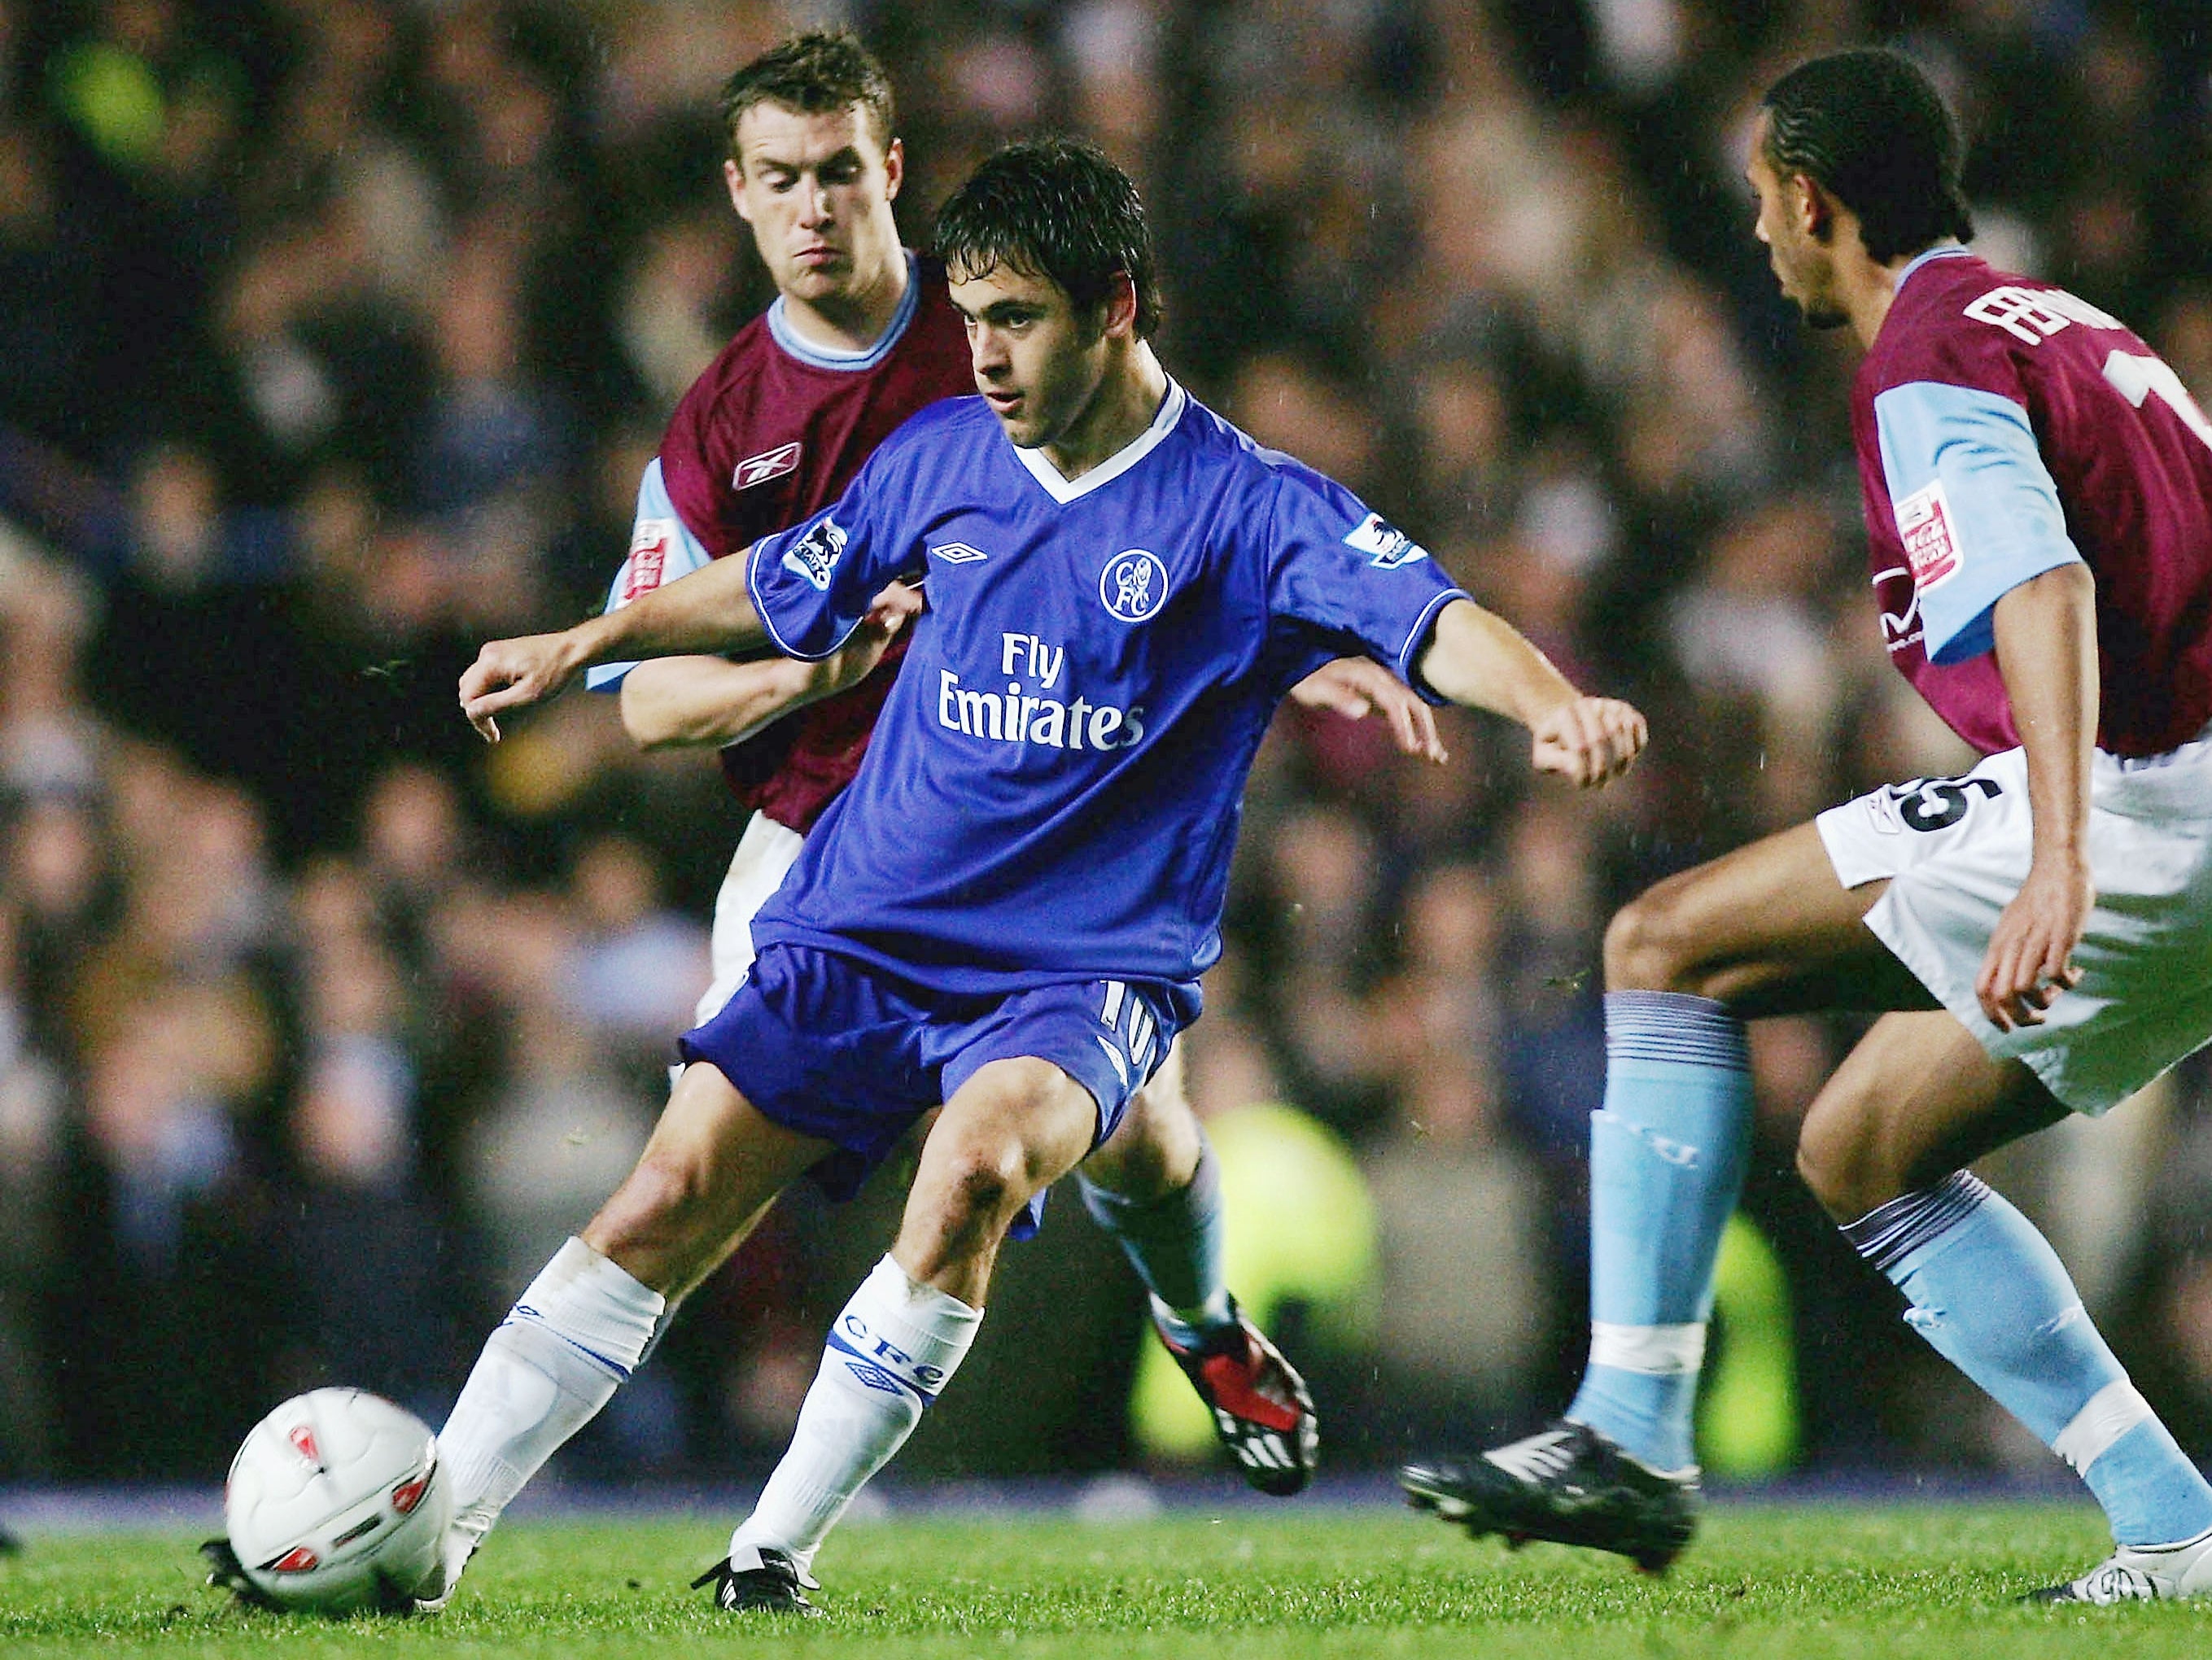 Joe Cole in action against his former club West Ham for Chelsea in 2004